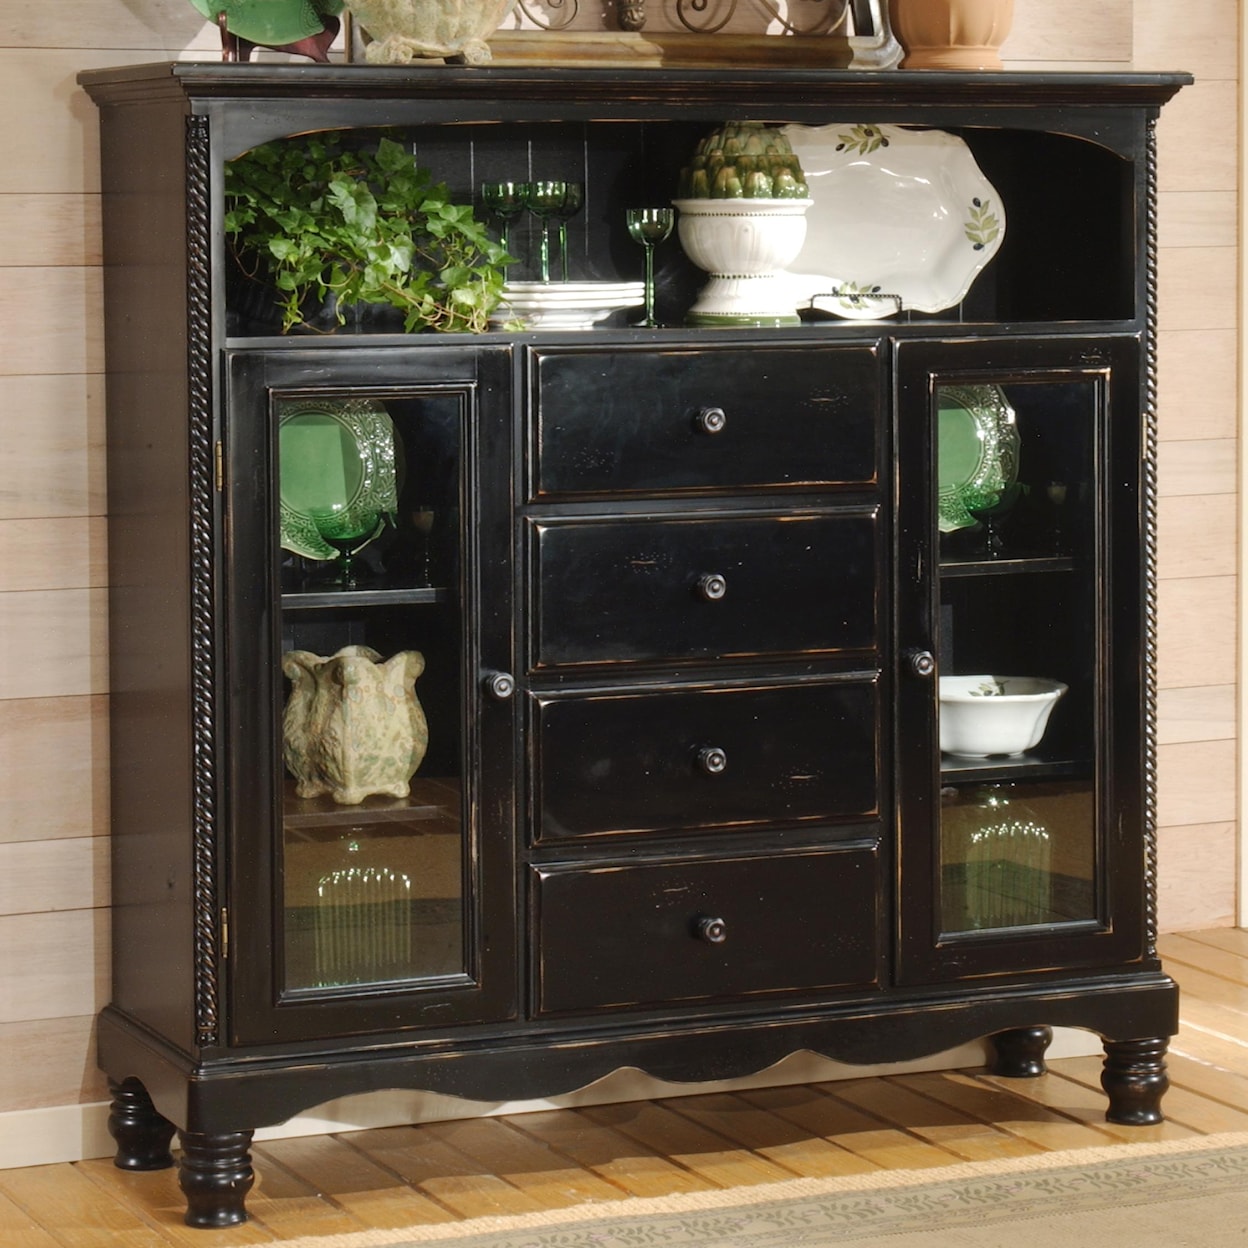 Hillsdale Wilshire Tall Country Baker's Cabinet